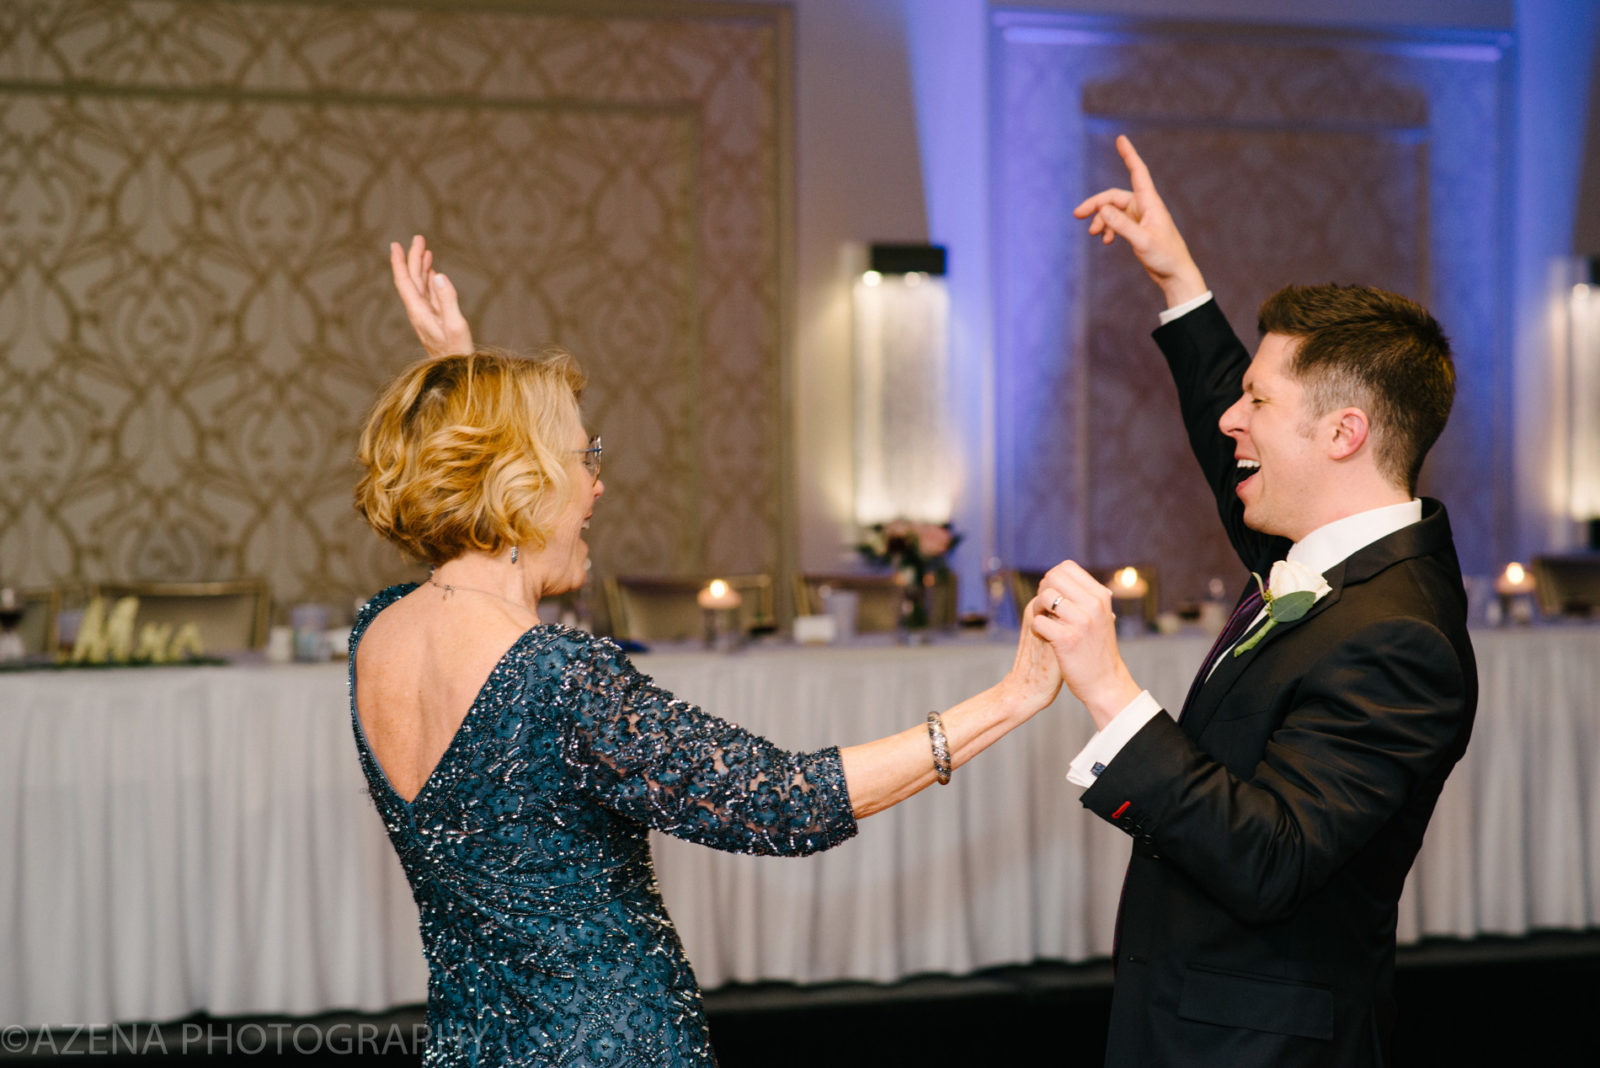 Mother and Son dance at wedding